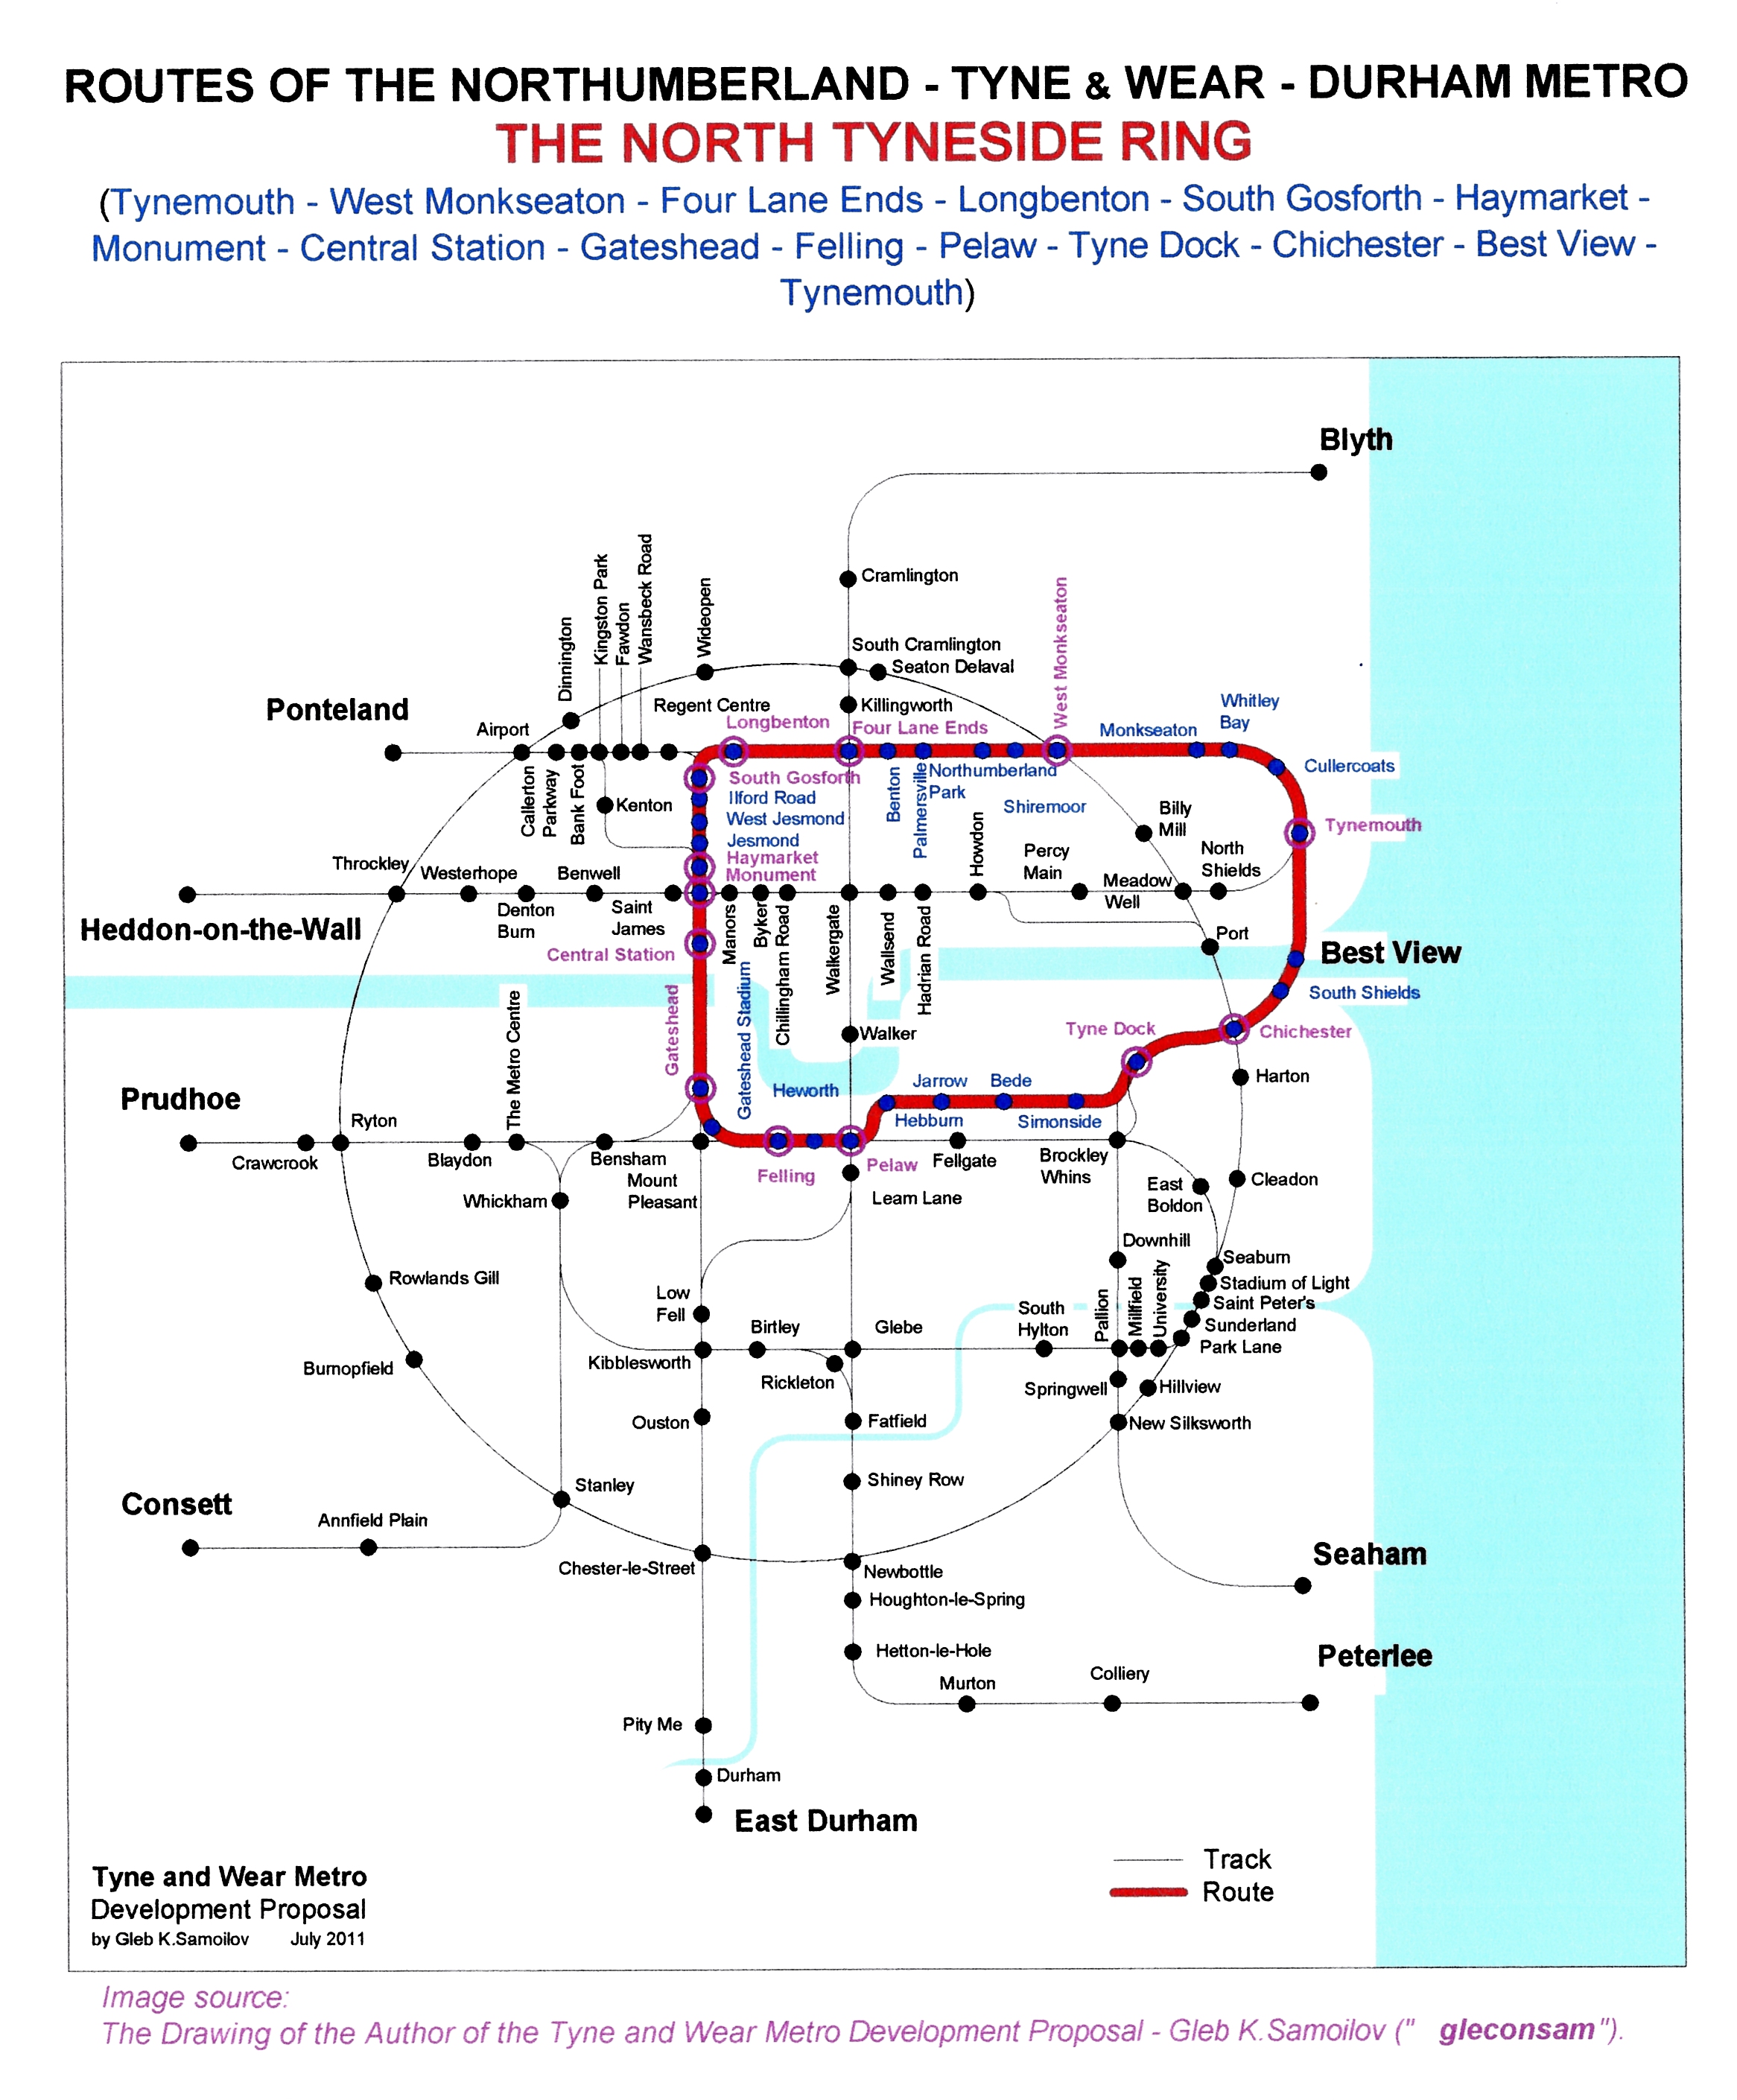 The Tyne and Wear Metro. Developed network routes. The NORTH TYNESIDE RING